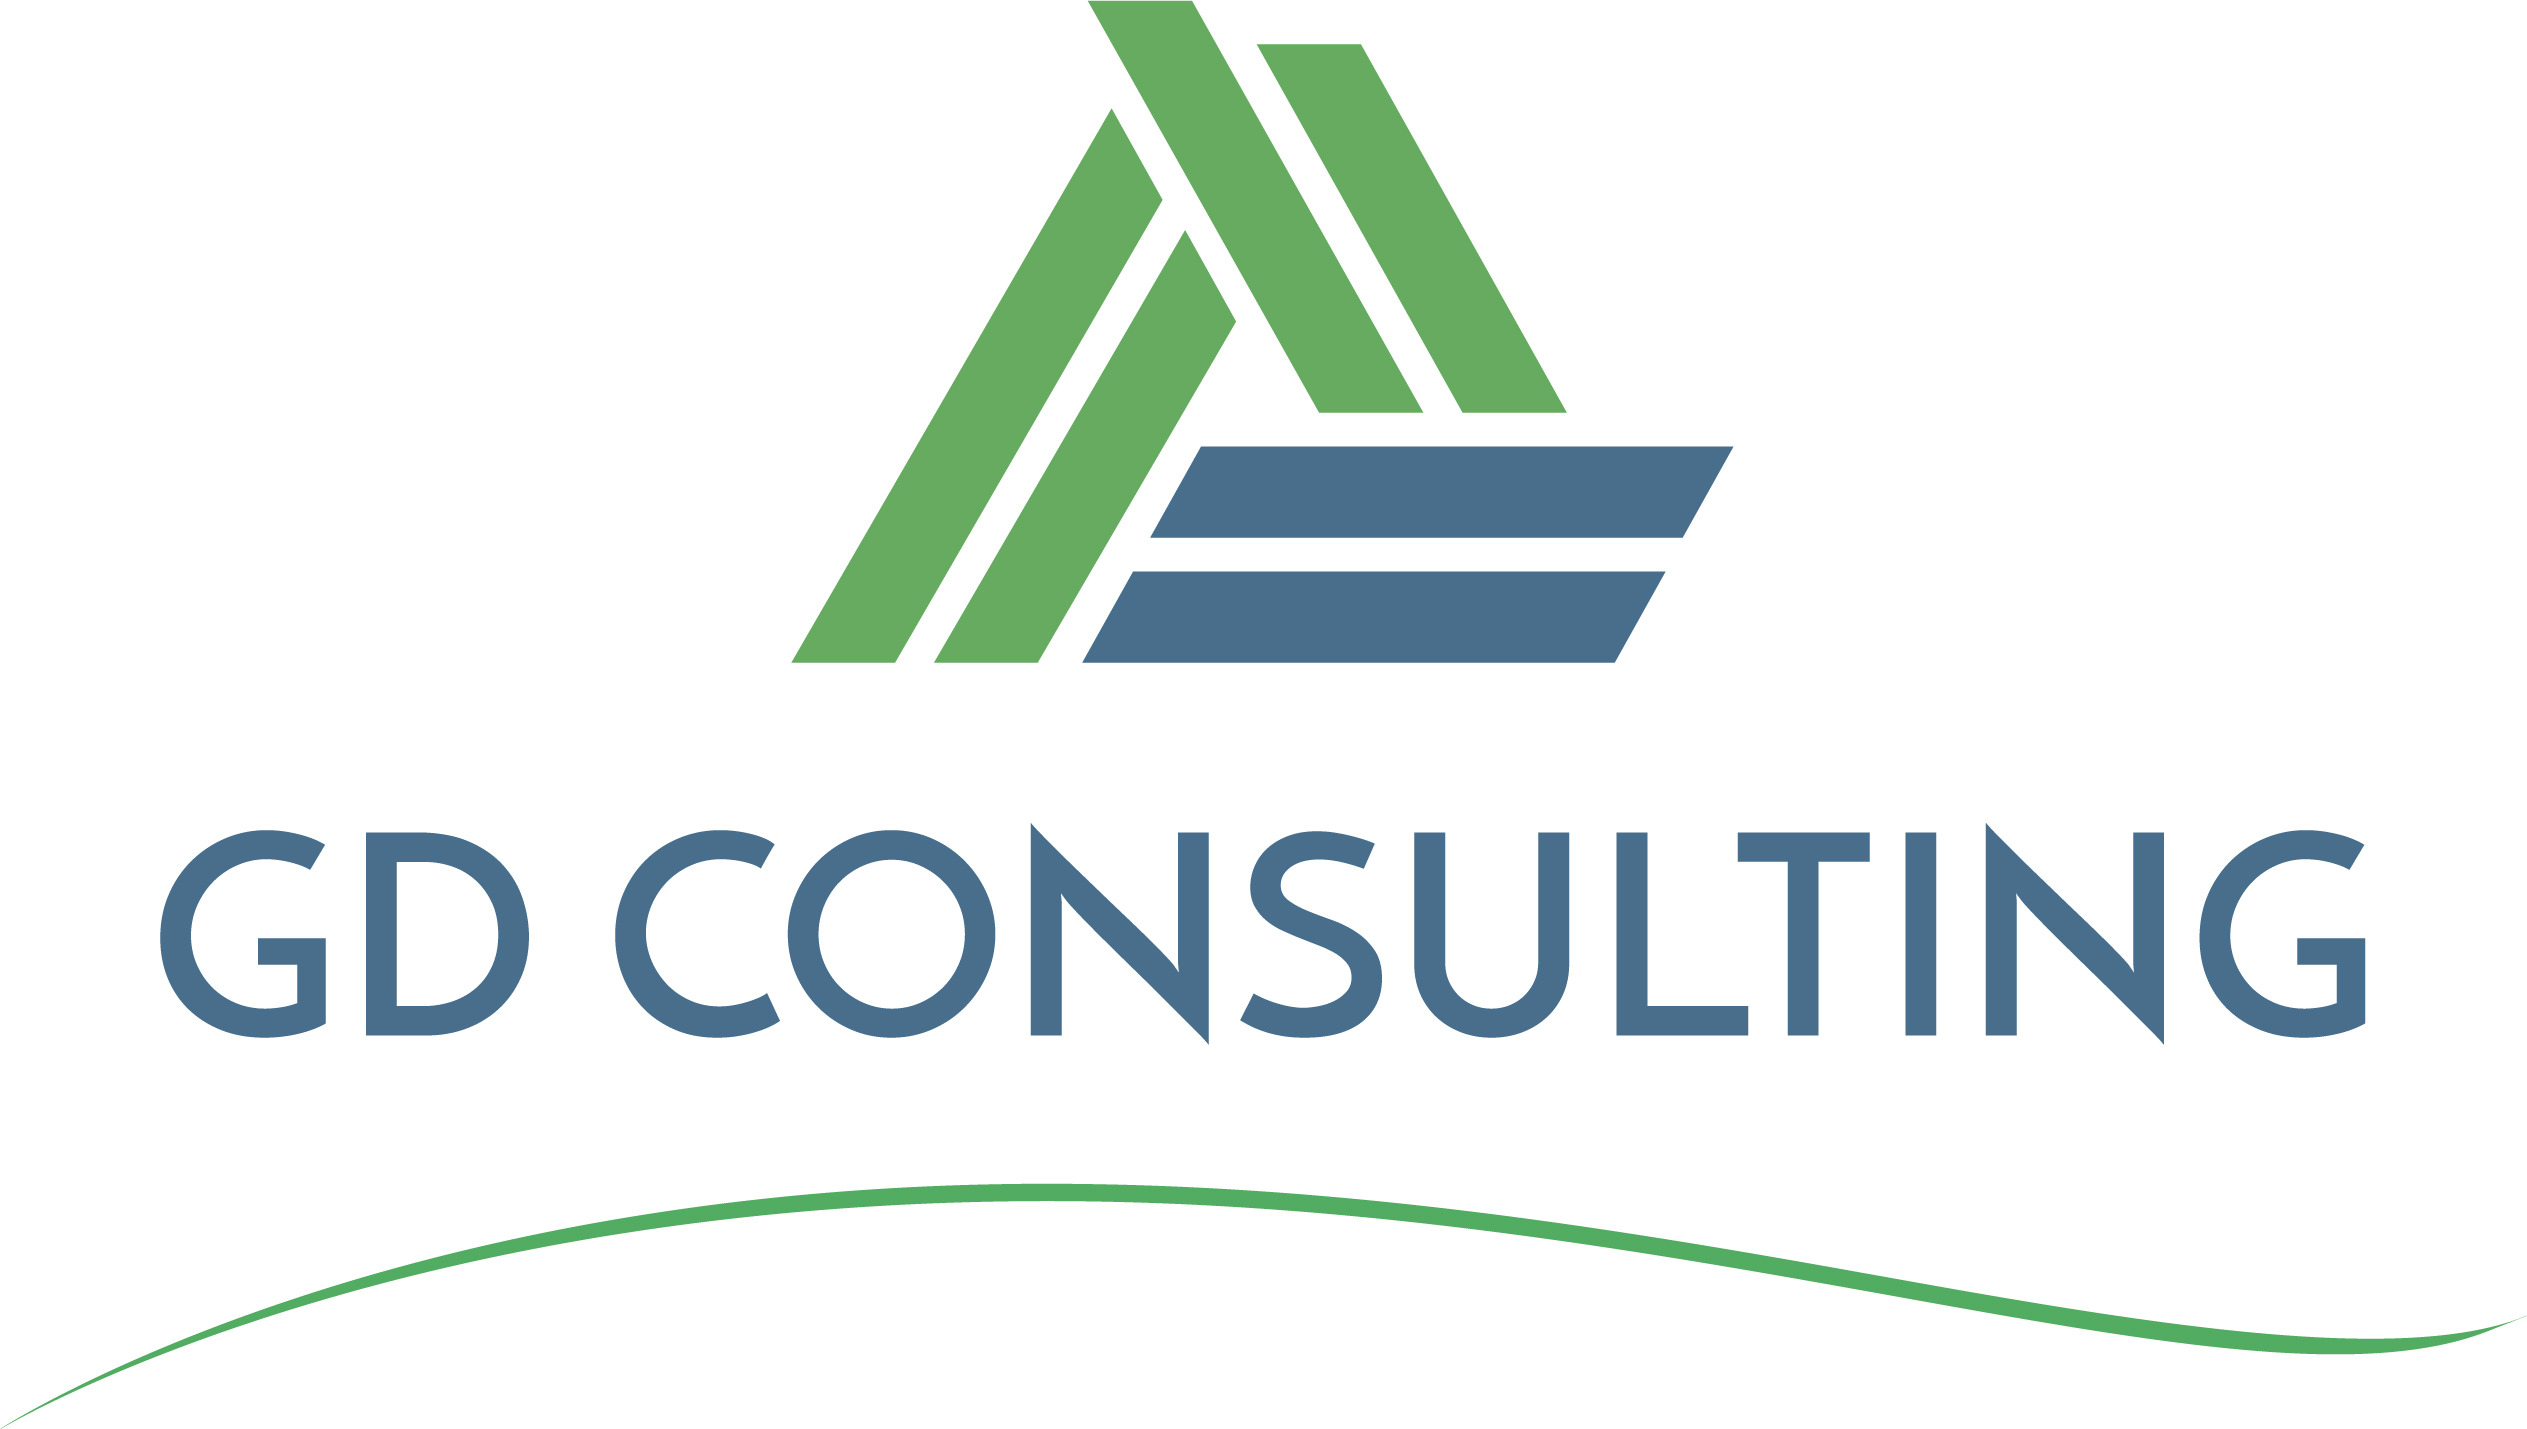 GD Consulting